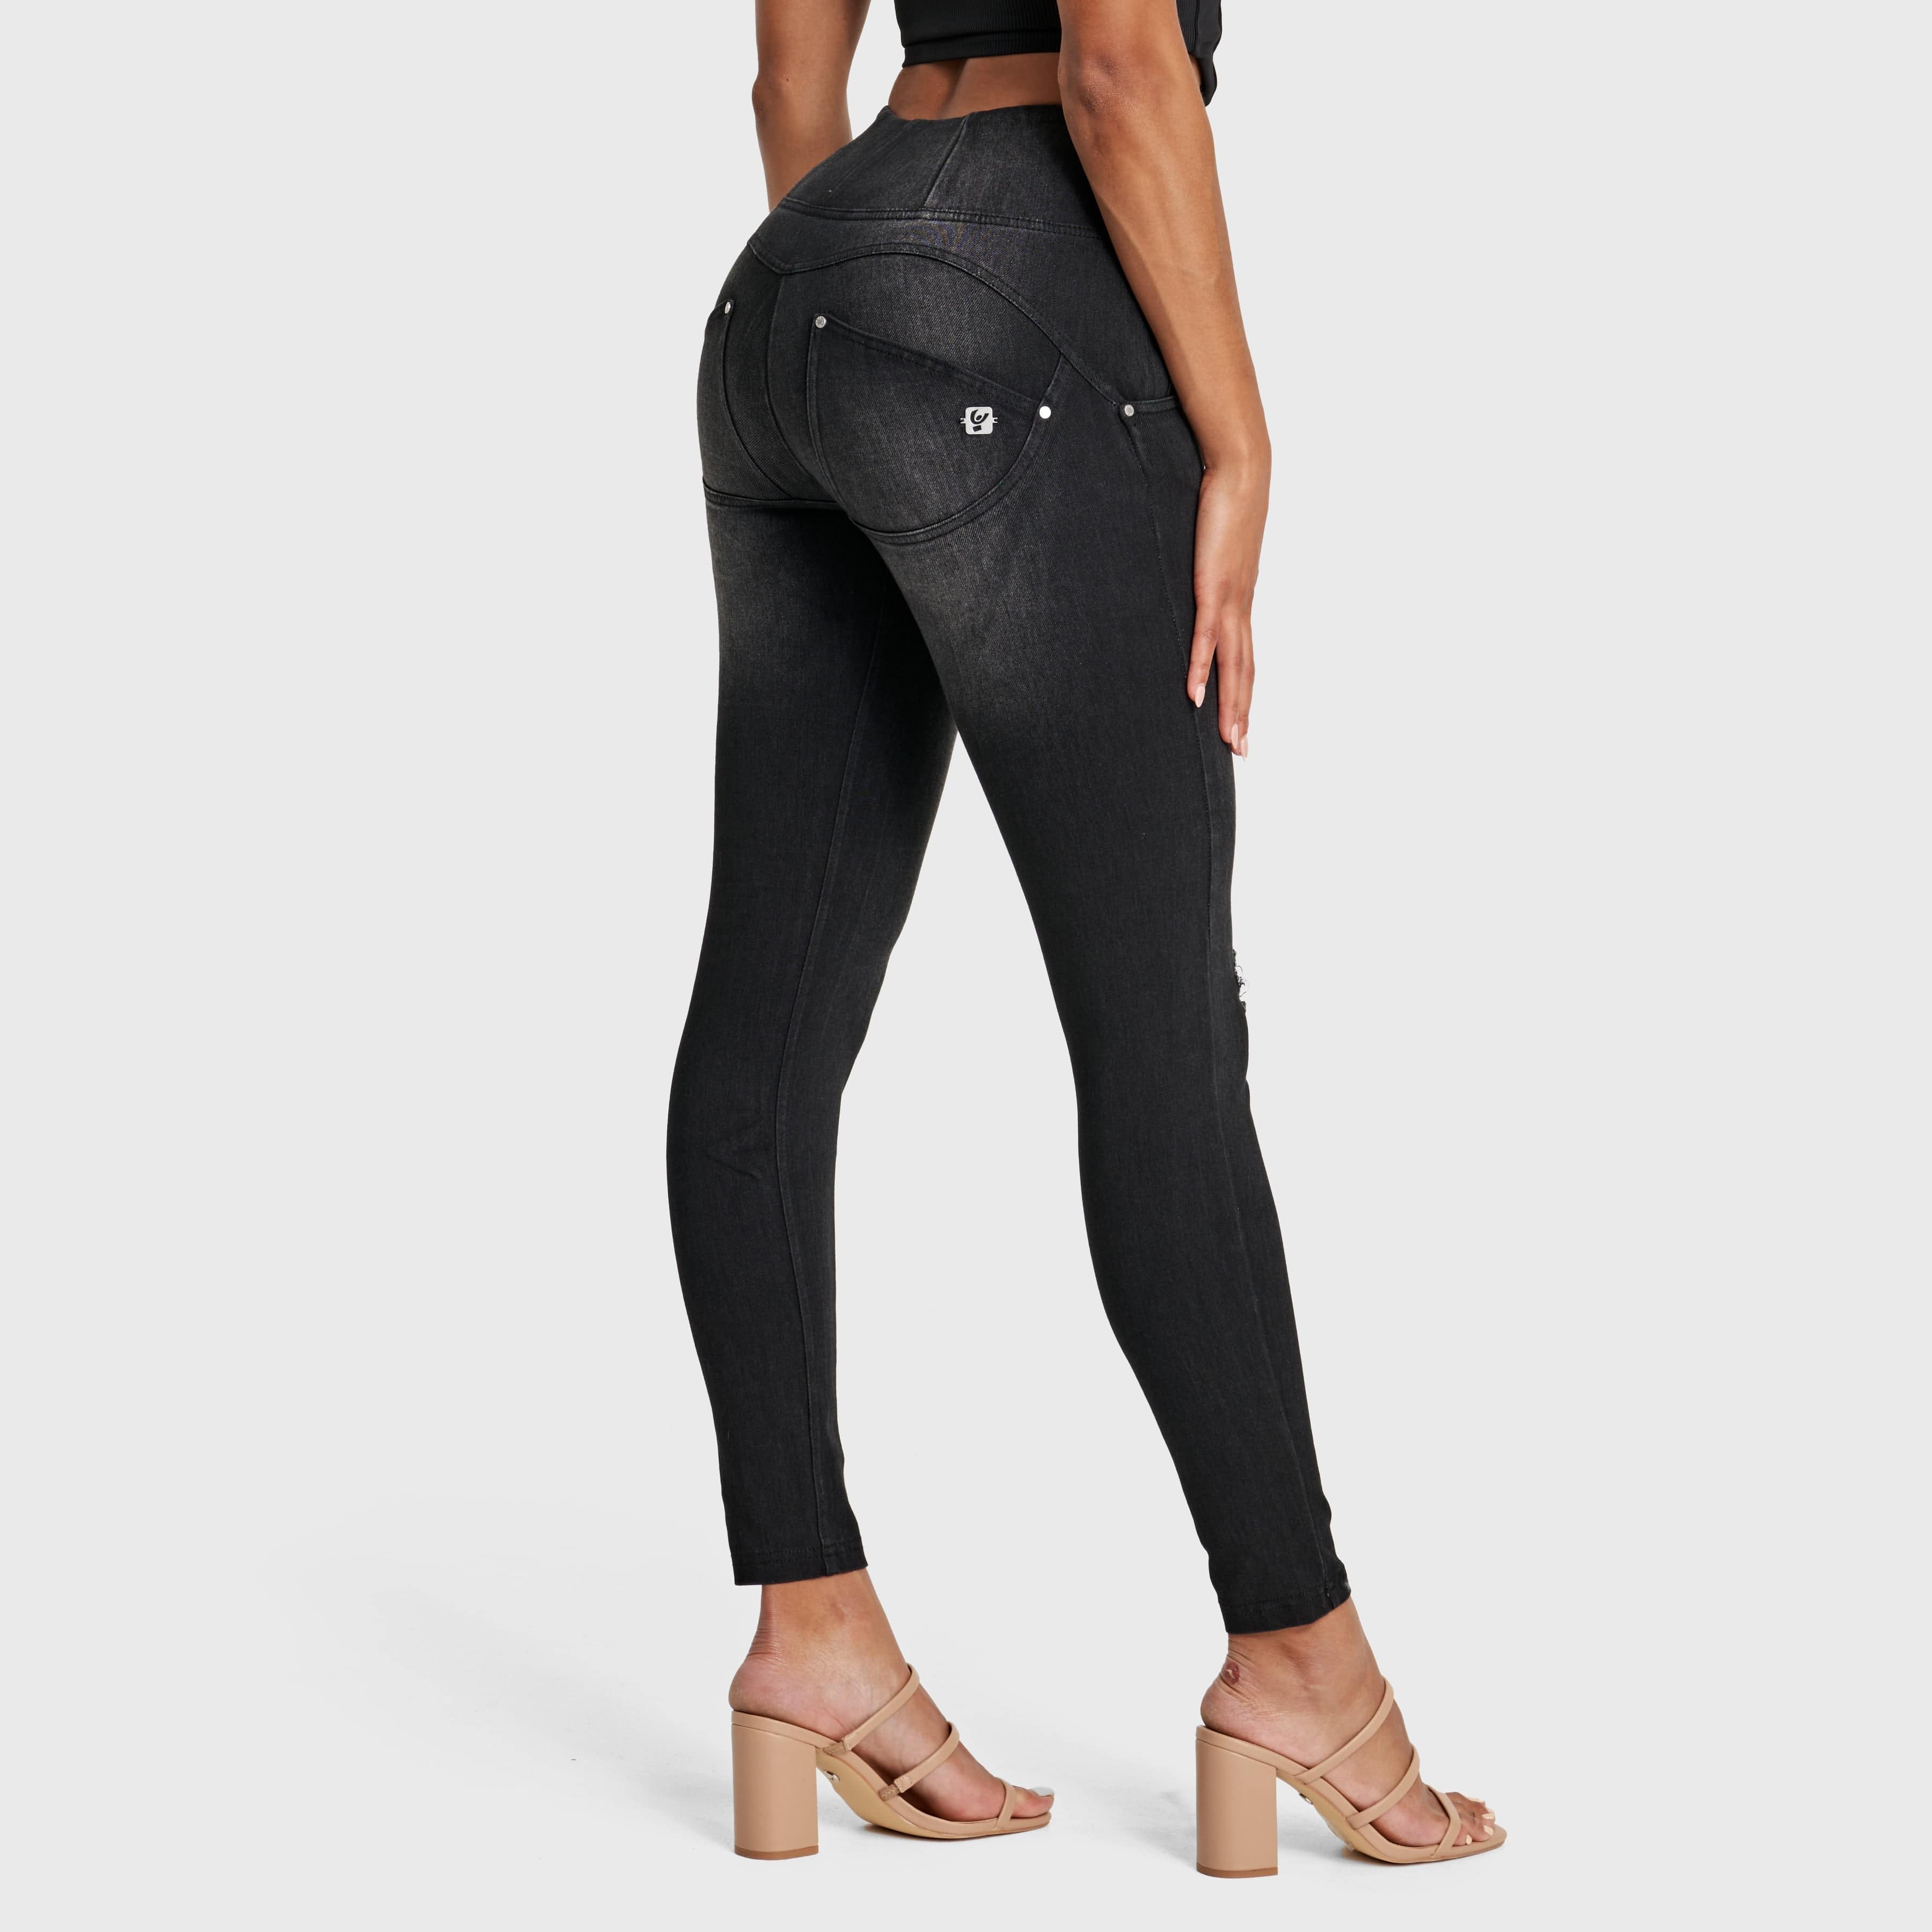 WR.UP® Snug Distressed Jeans - High Waisted - Full Length - Black + Black Stitching 2